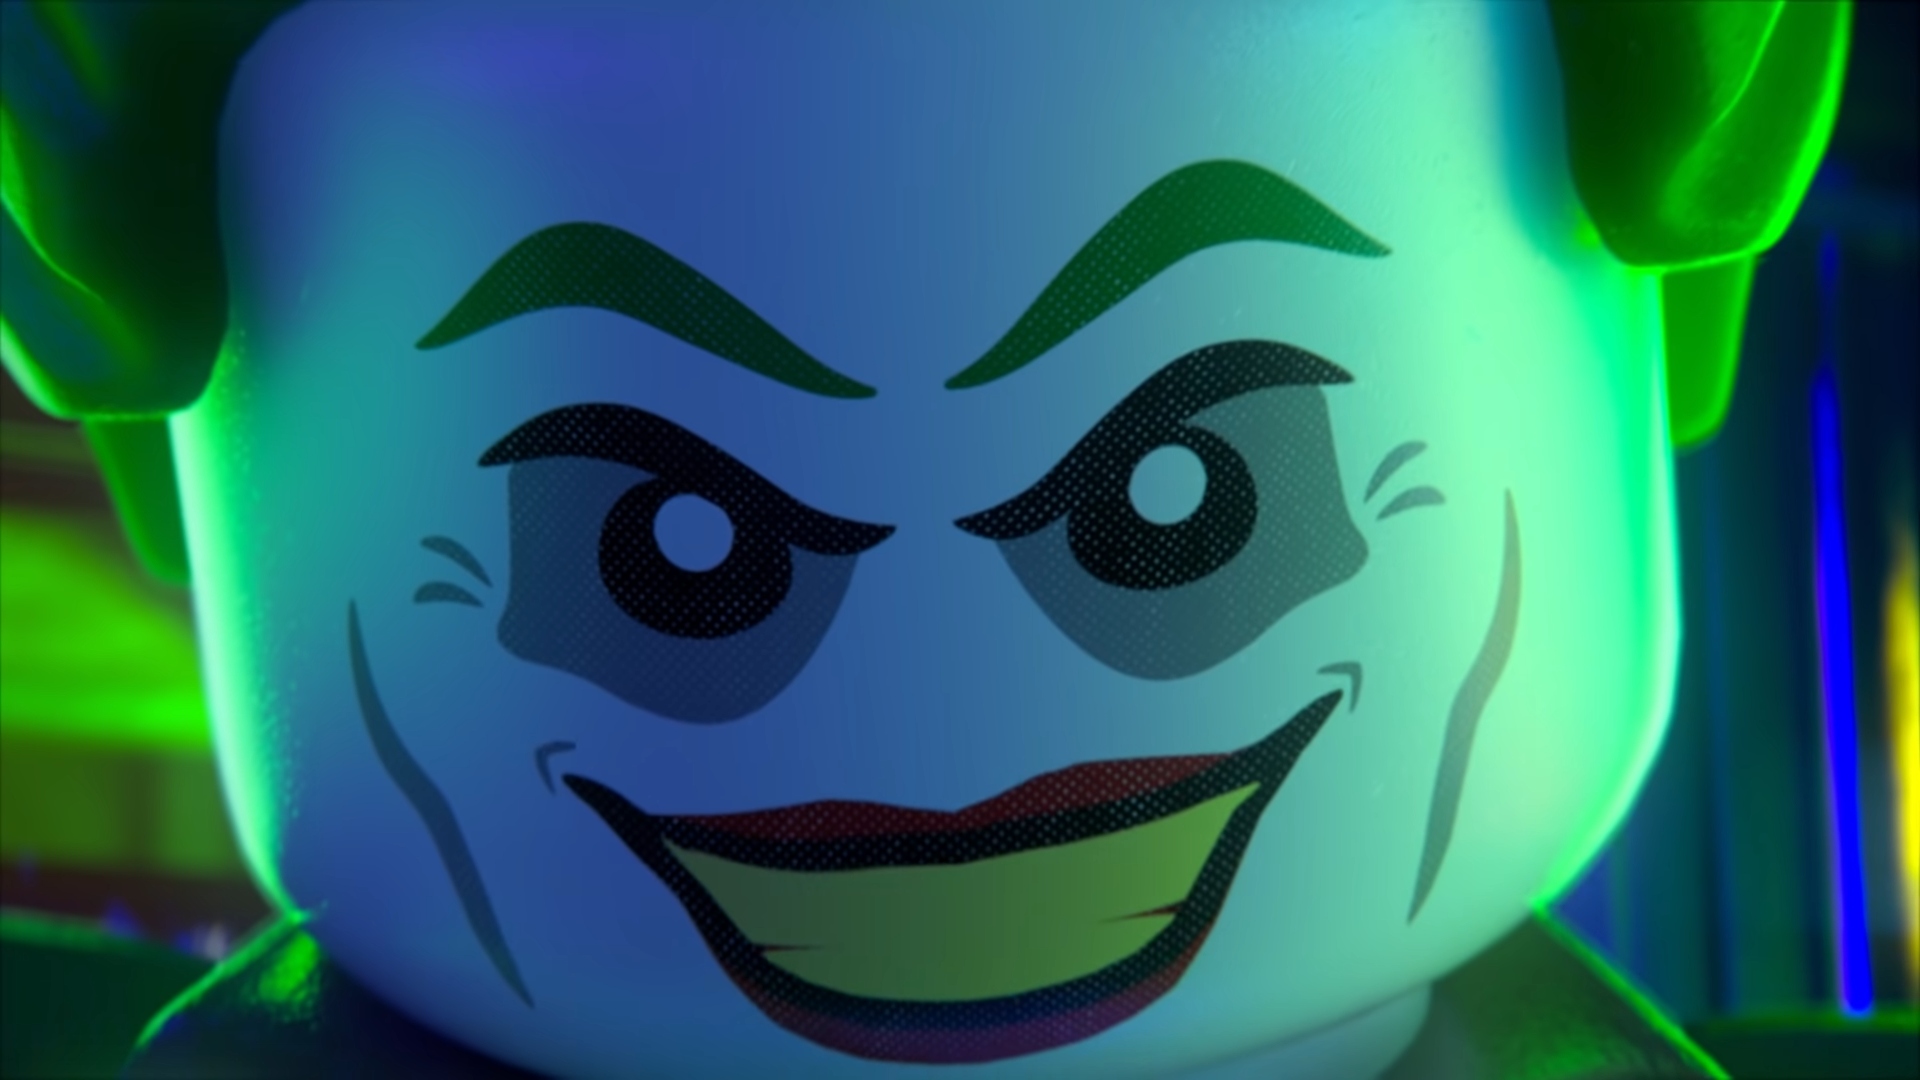 Buy LEGO® Batman: The Videogame from the Humble Store